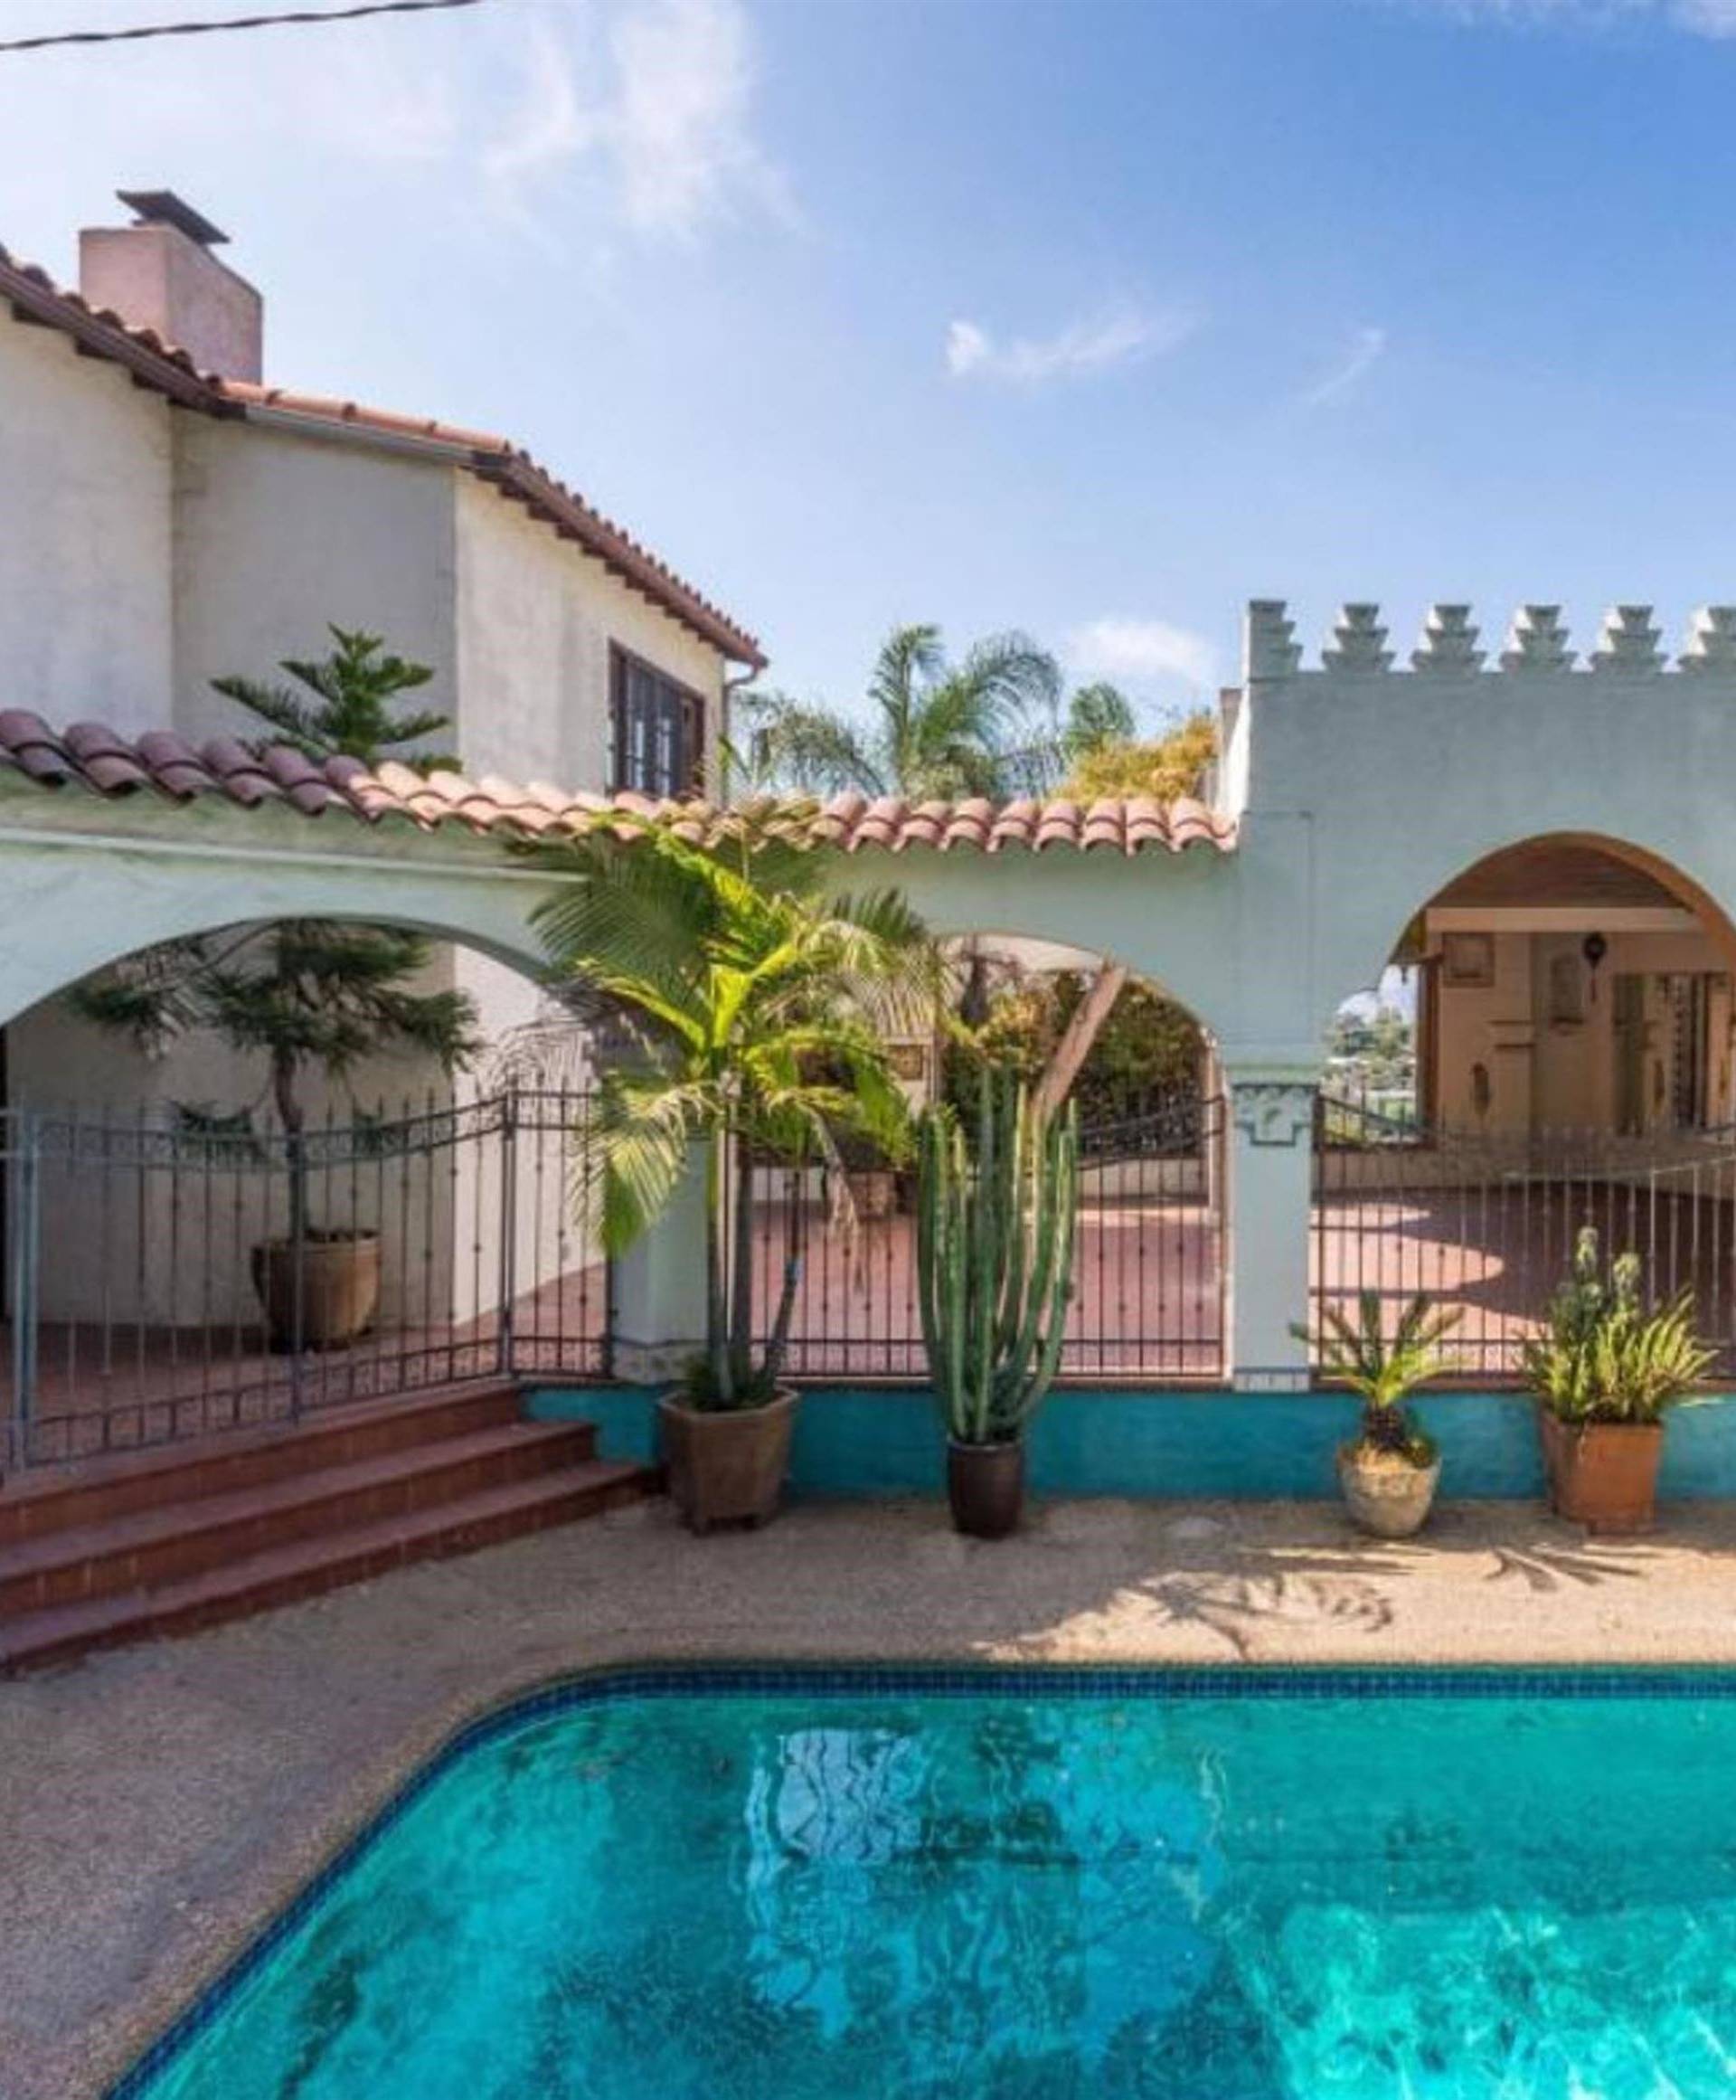 Leonardo DiCaprio lists for sale the Hollywood mansion he bought with his Titanic pay cheque